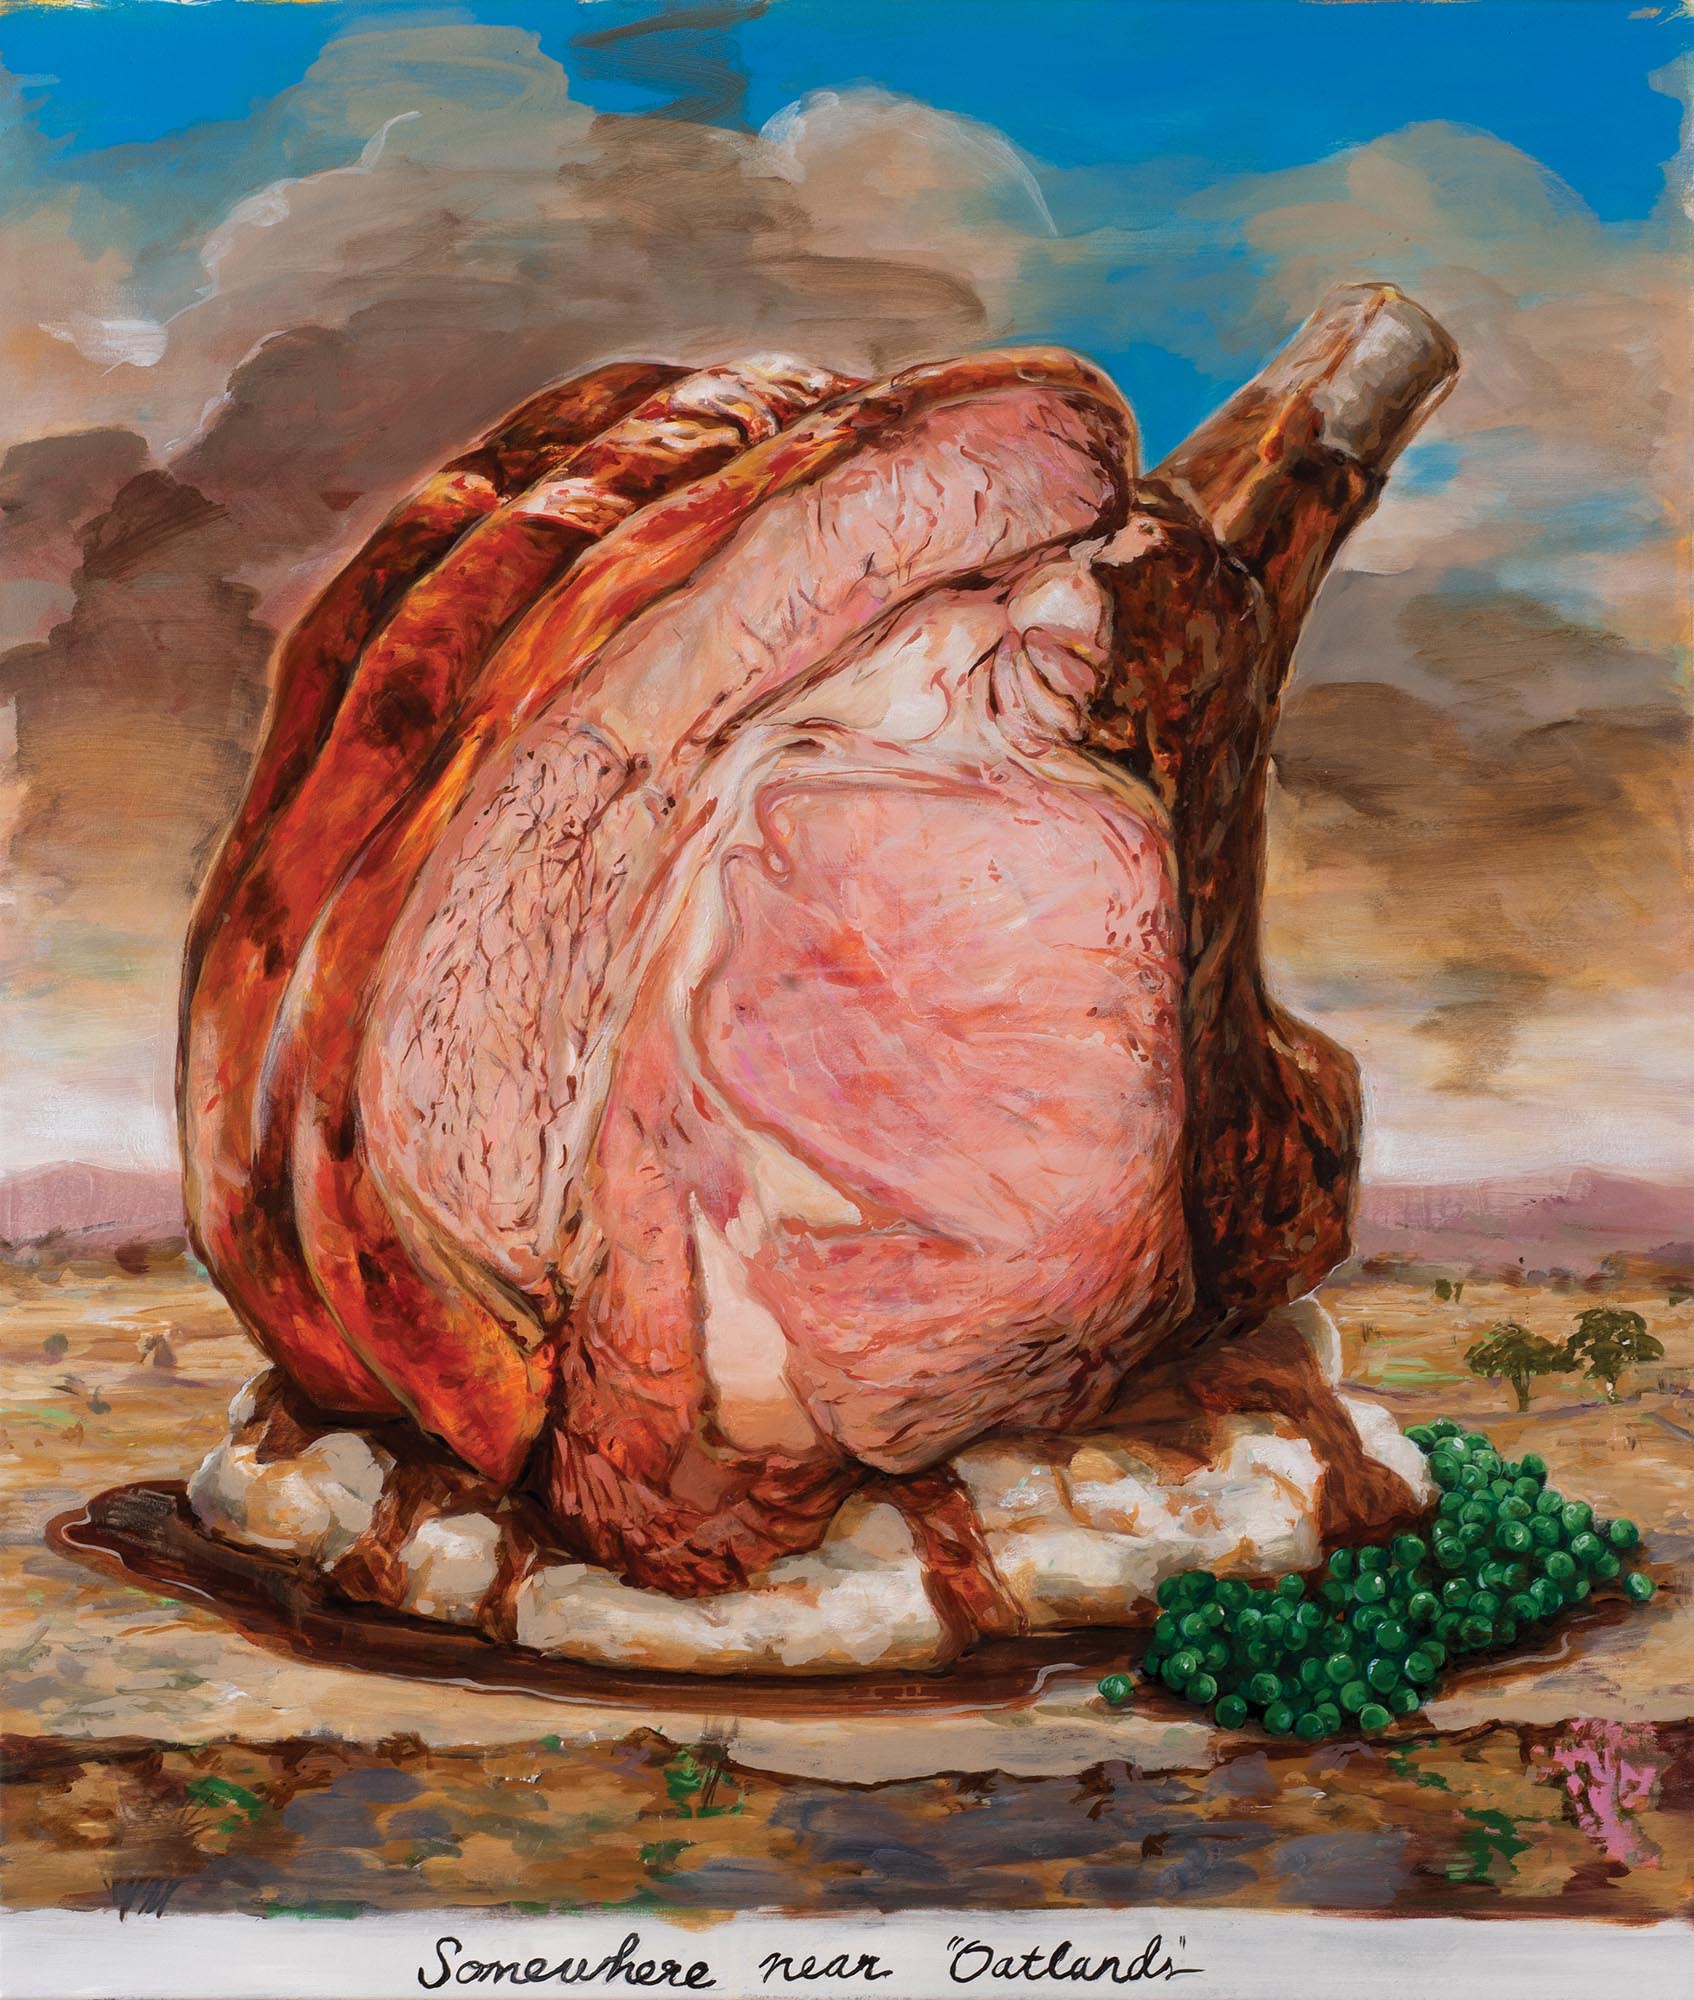 A painting of a gigantic cooked leg of ham on a brown landscape.